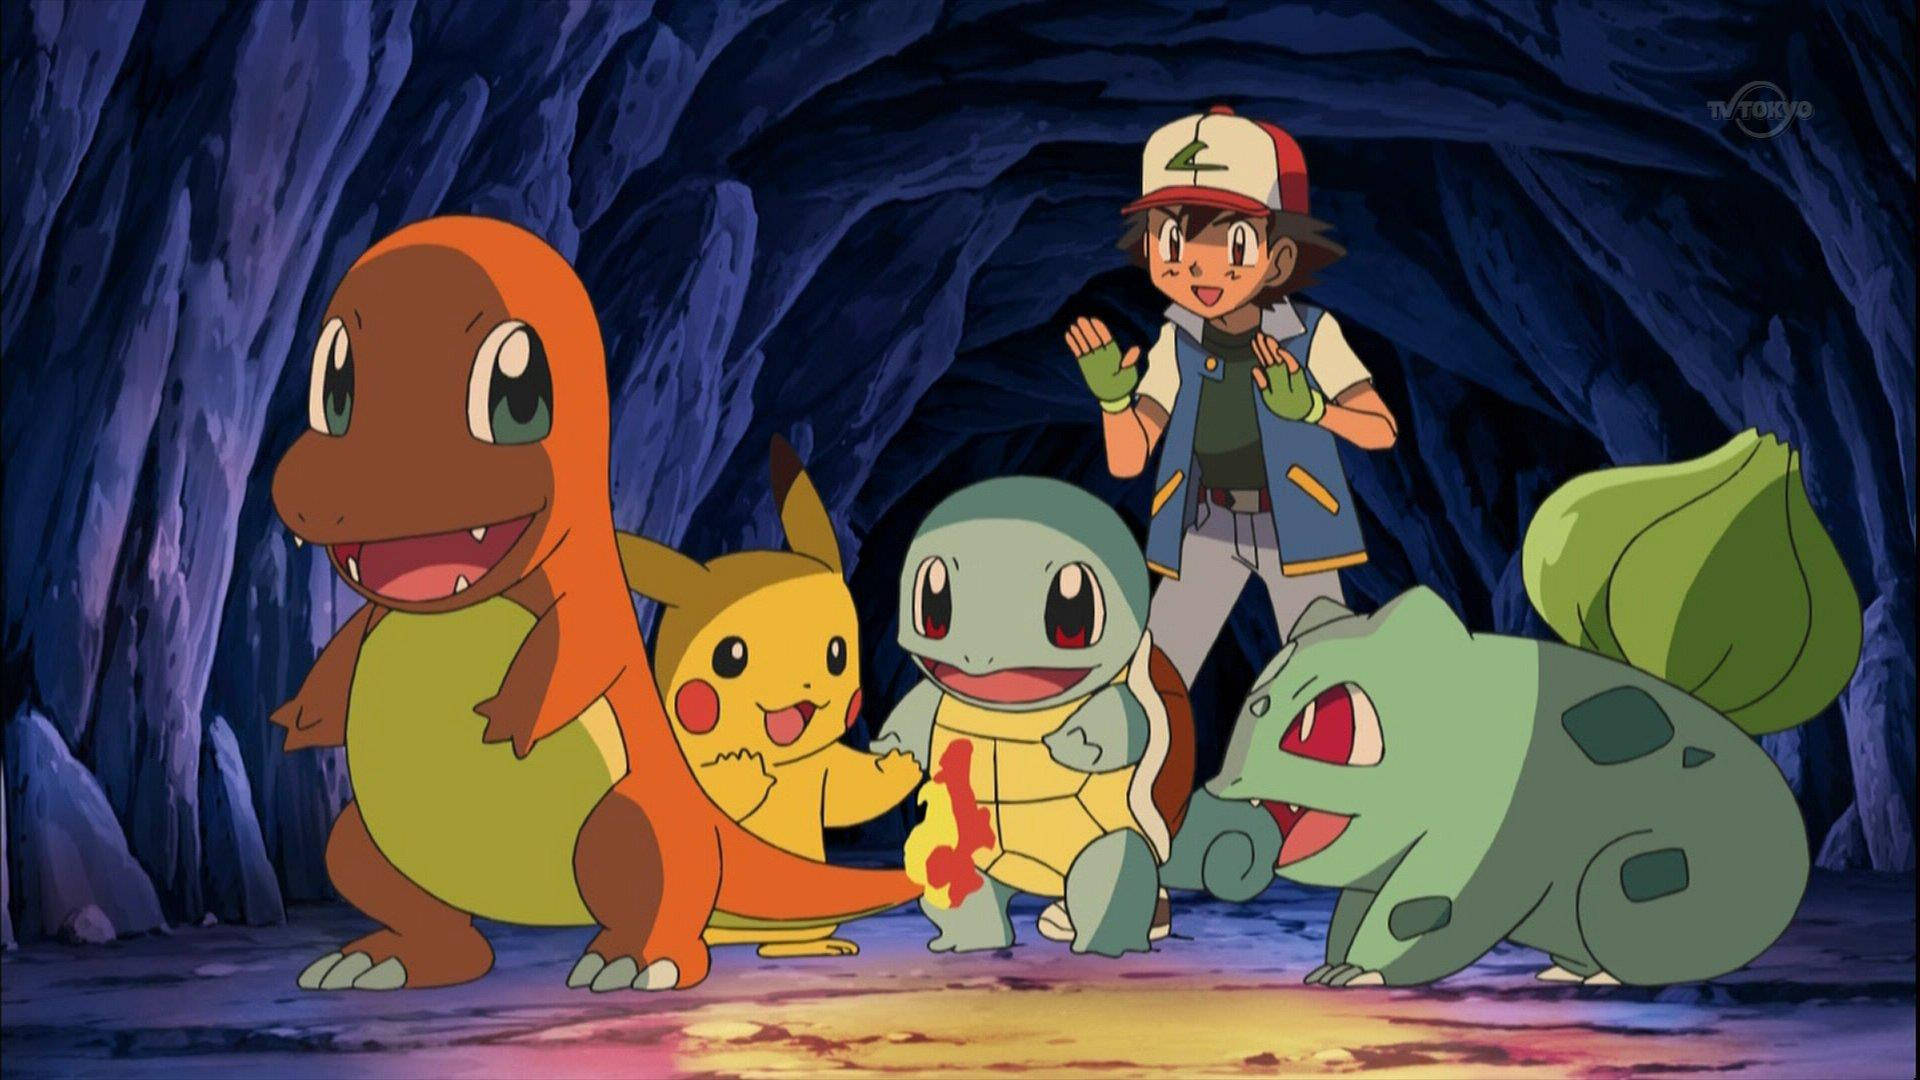 Ash With The Pokémon's Hd Background